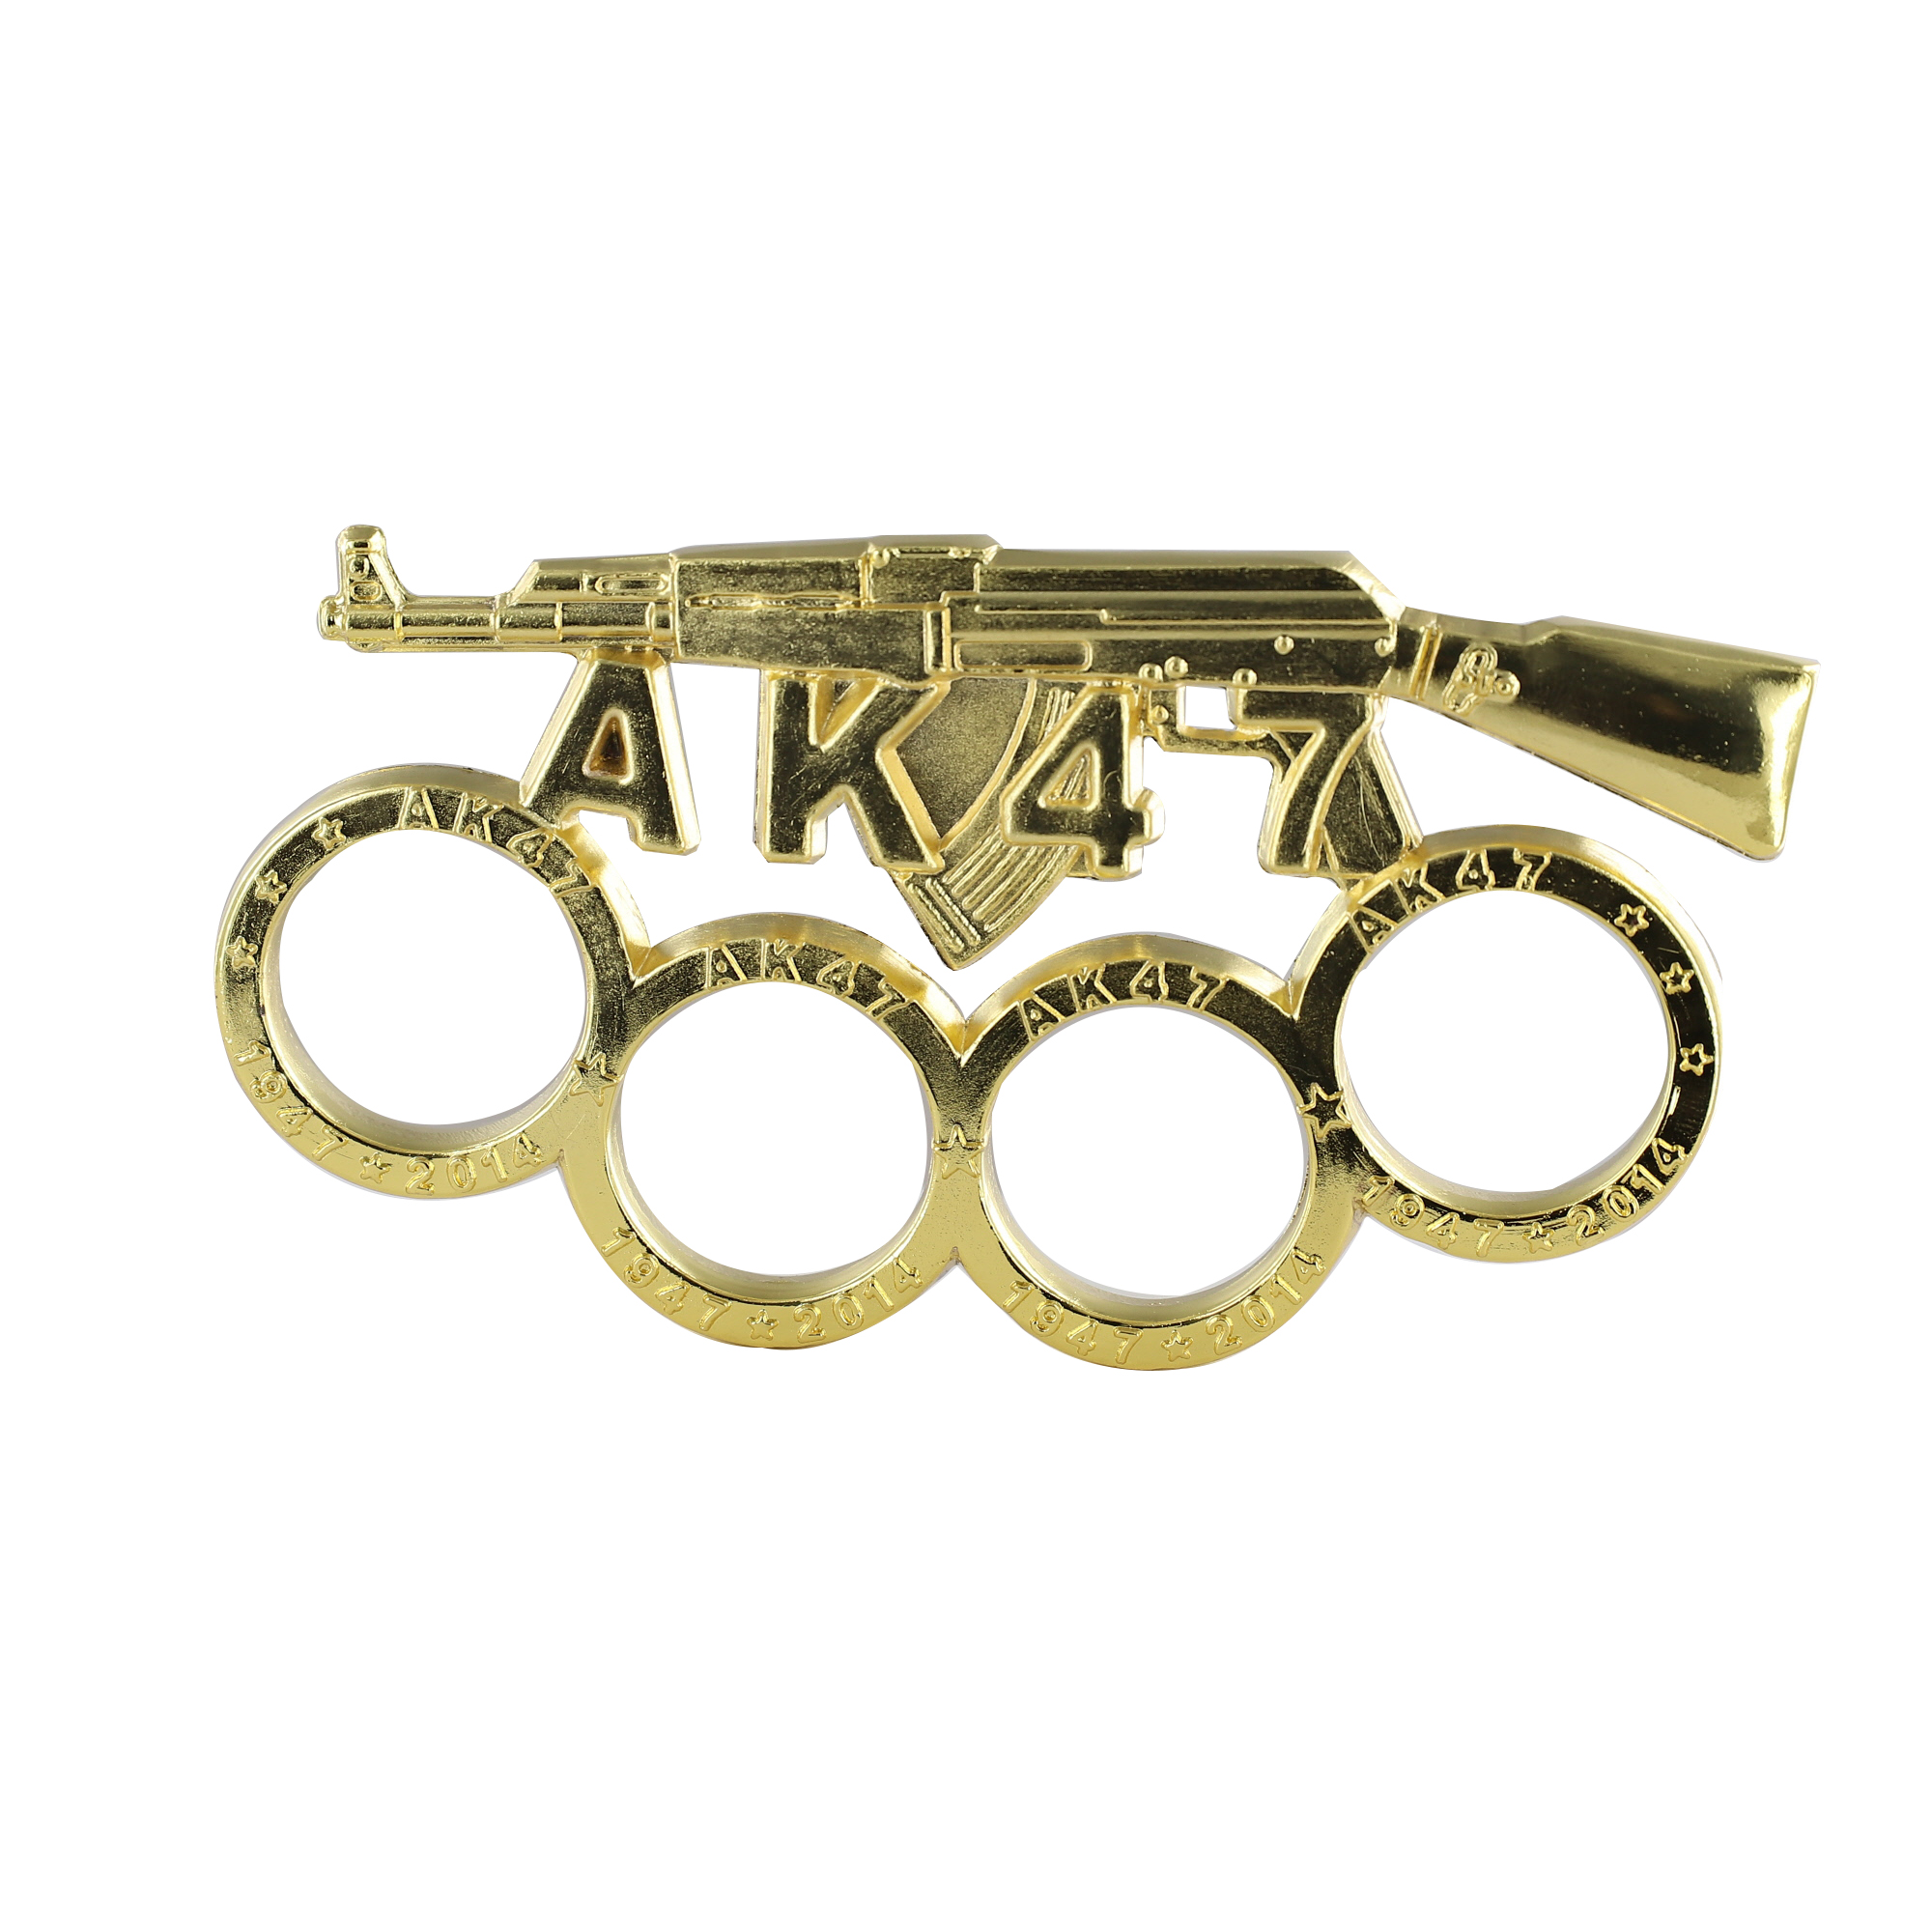 Friendly Neighbor AK 47 Knuckleduster Paper Weight Accessory